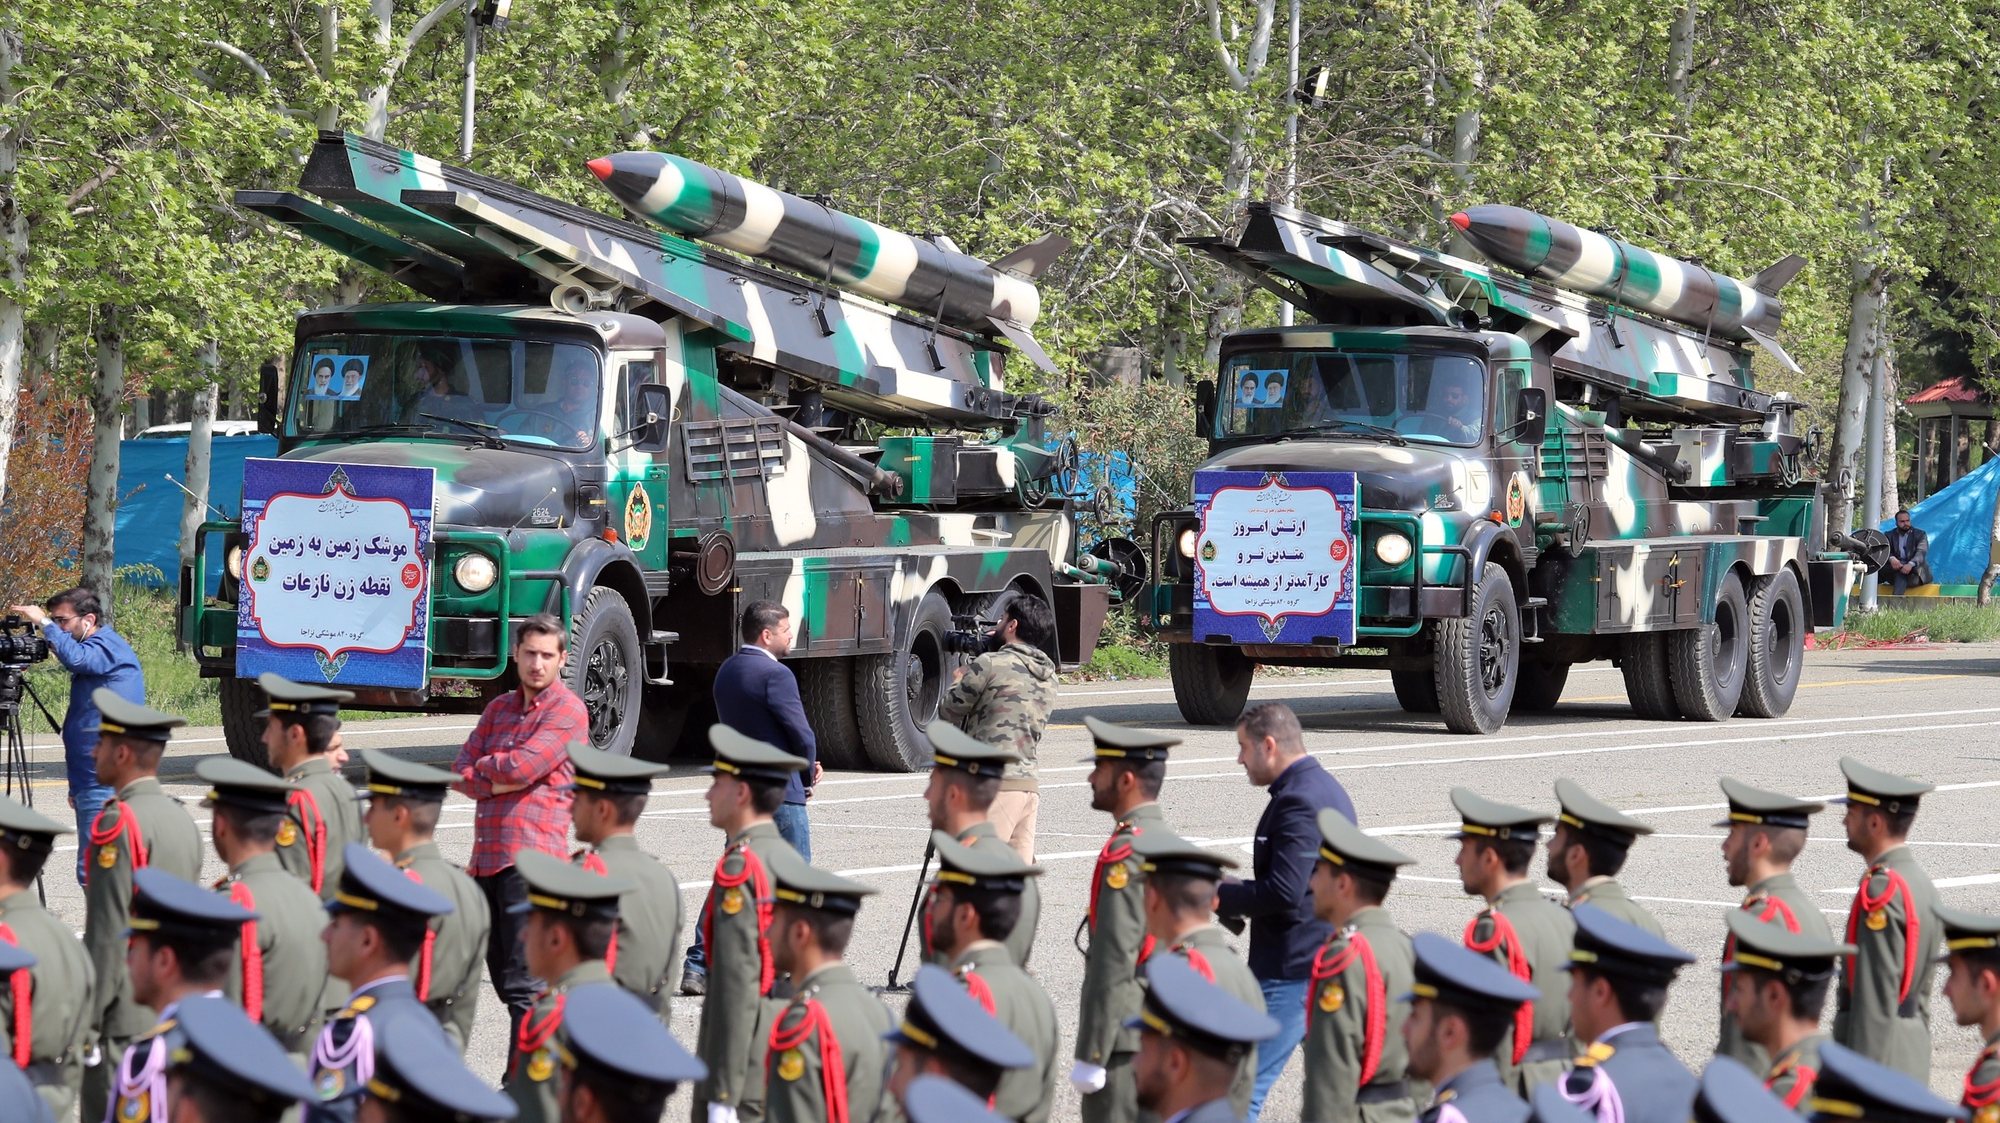 epa11283816 Iranian medium range missiles &#039;Nazeat&#039; are displayed during the annual Army Day celebration at a military base in Tehran, Iran, 17 April 2024. According to Iranian state media, Raisi described the recent attack launched towards Israel as &#039;limited&#039; and &#039;punitive&#039;, adding that any act of aggression against Iran will be dealt with a &#039;powerful and fierce&#039; response. Iran&#039;s Islamic Revolutionary Guards Corps (IRGC) launched drones and rockets towards Israel late on 13 April.  EPA/ABEDIN TAHERKENAREH